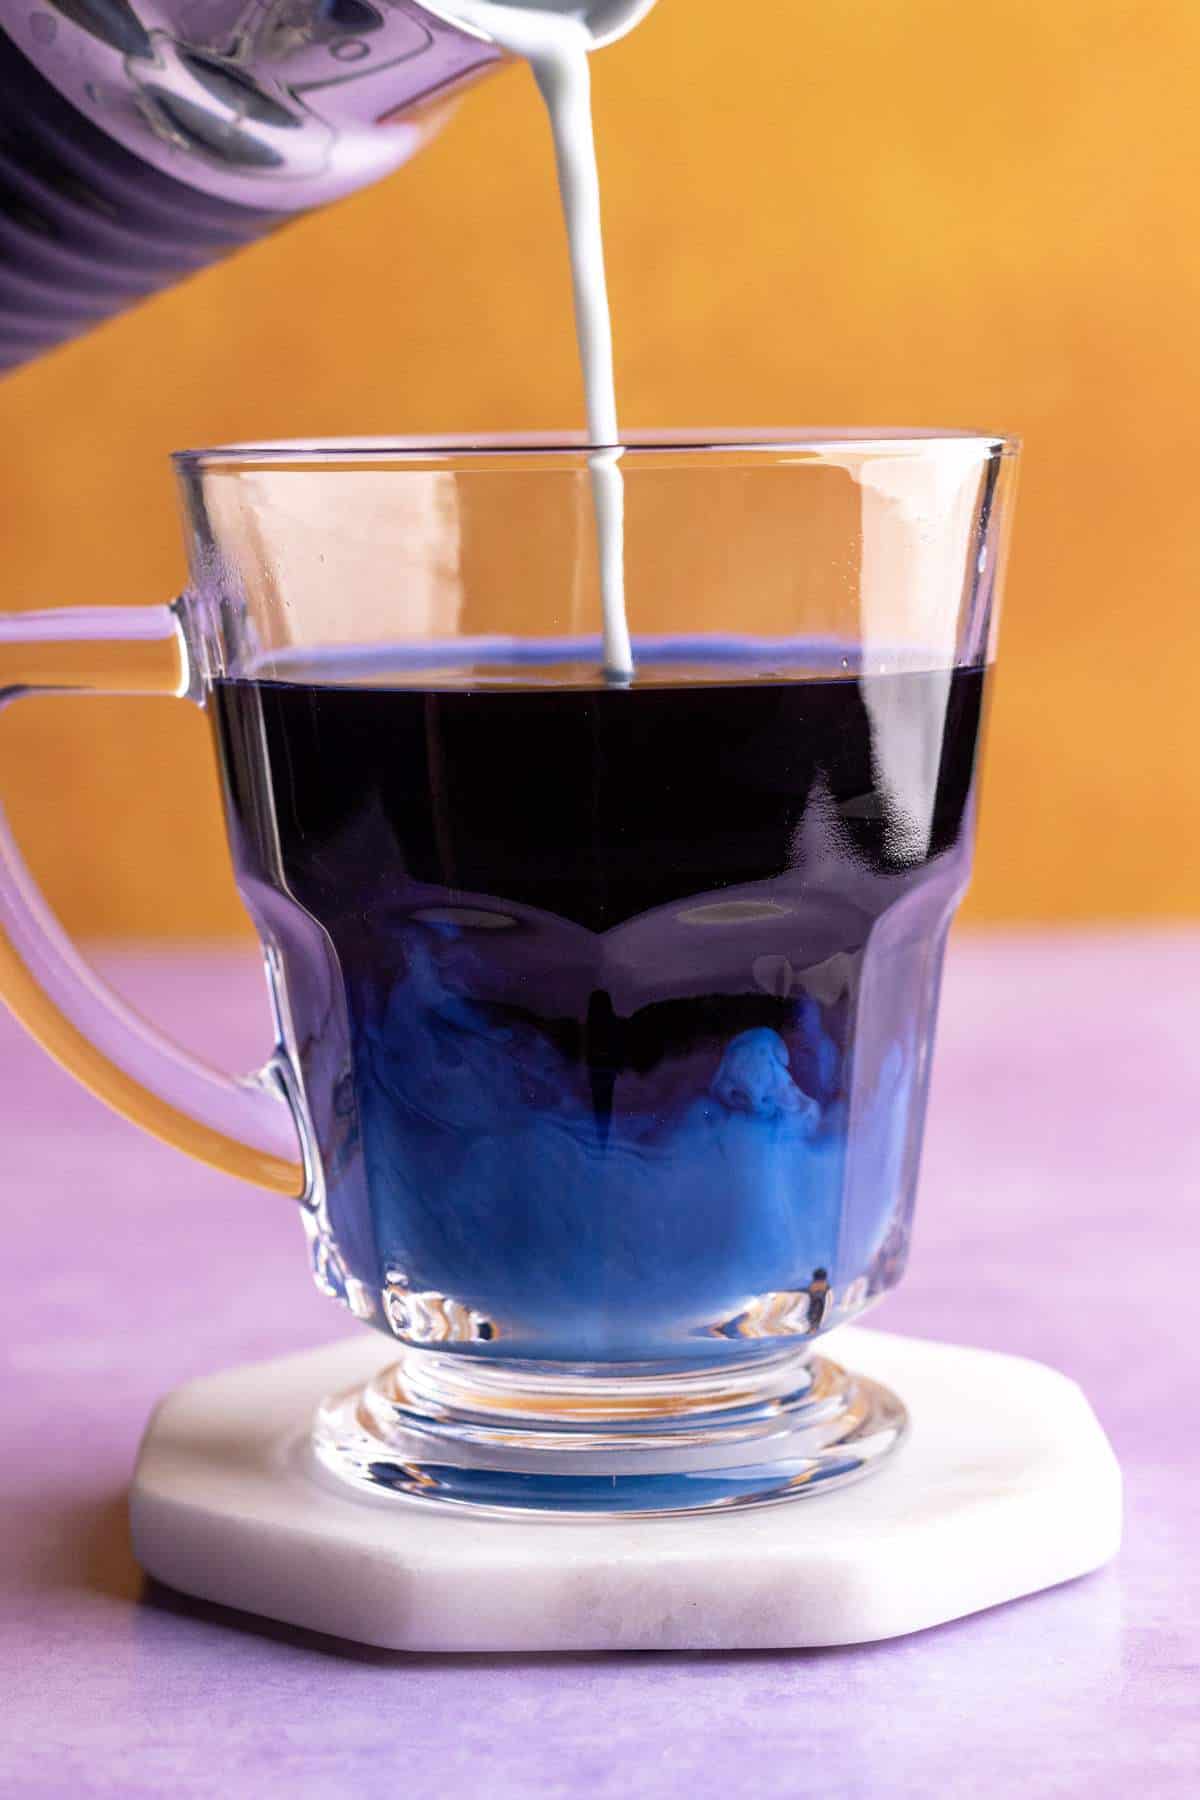 Butterfly pea latte pouring into the mug.